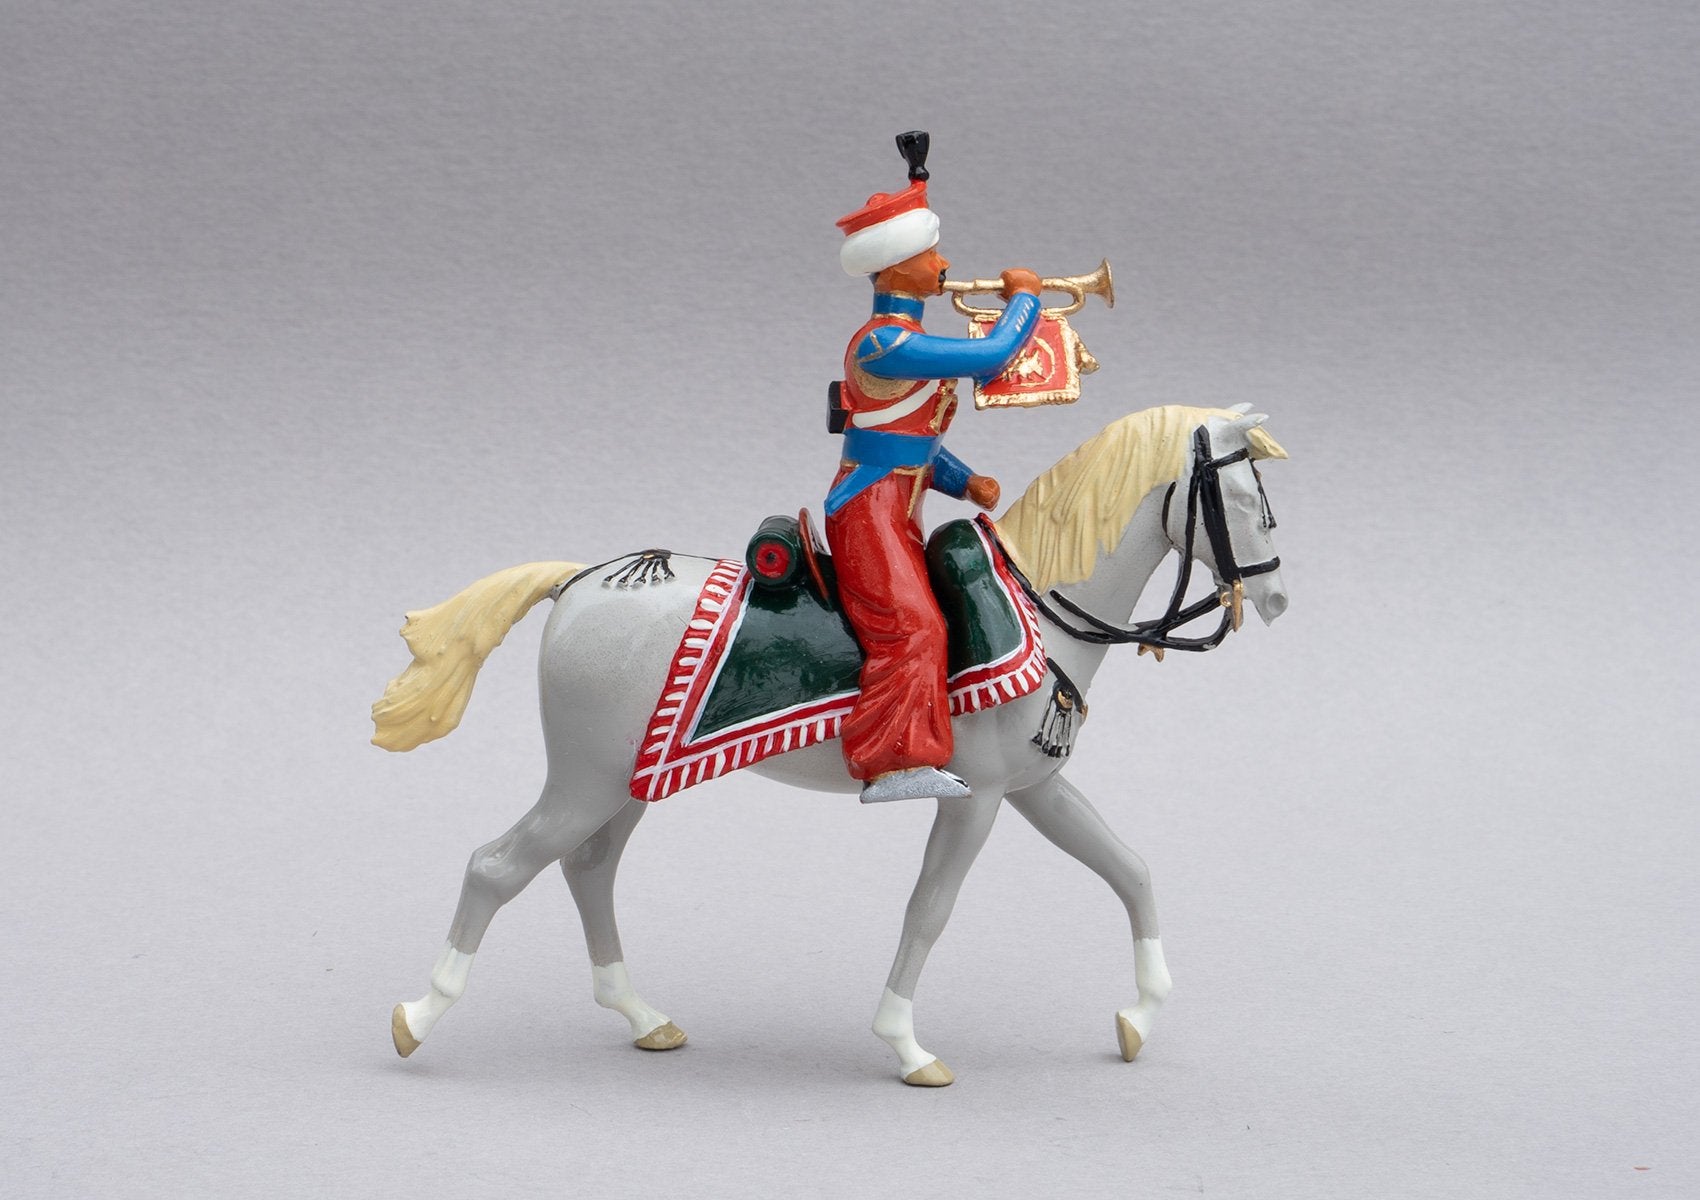 Set 119 Mameluke Trumpeter | French Cavalry | Napoleonic Wars | Trumpeter of Marmeluke cavalry. Distinguished by his sky blue tunic. Single mounted trumpeter on grey horse | Waterloo | © Imperial Productions | Sculpt by David Cowe